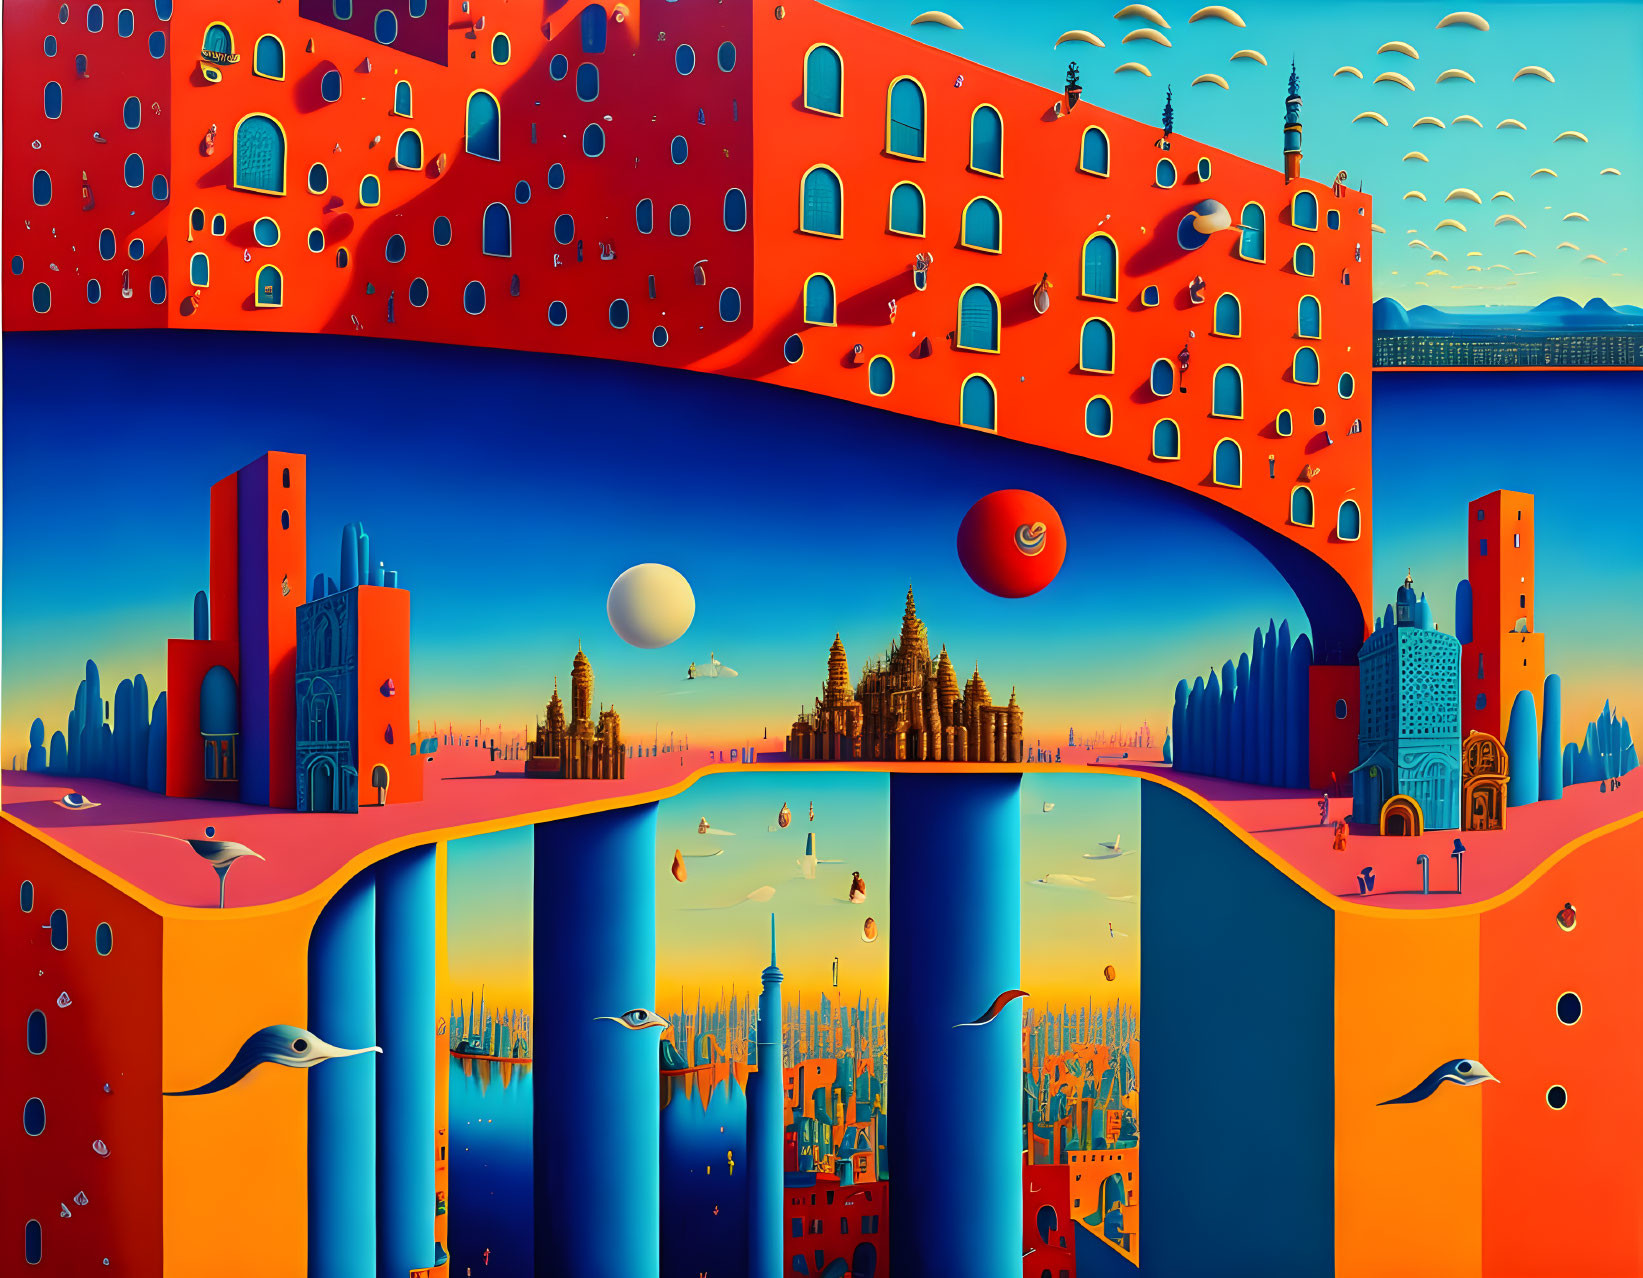 Vibrant surreal painting: architectural fantasy with arches, towers, and spherical elements.